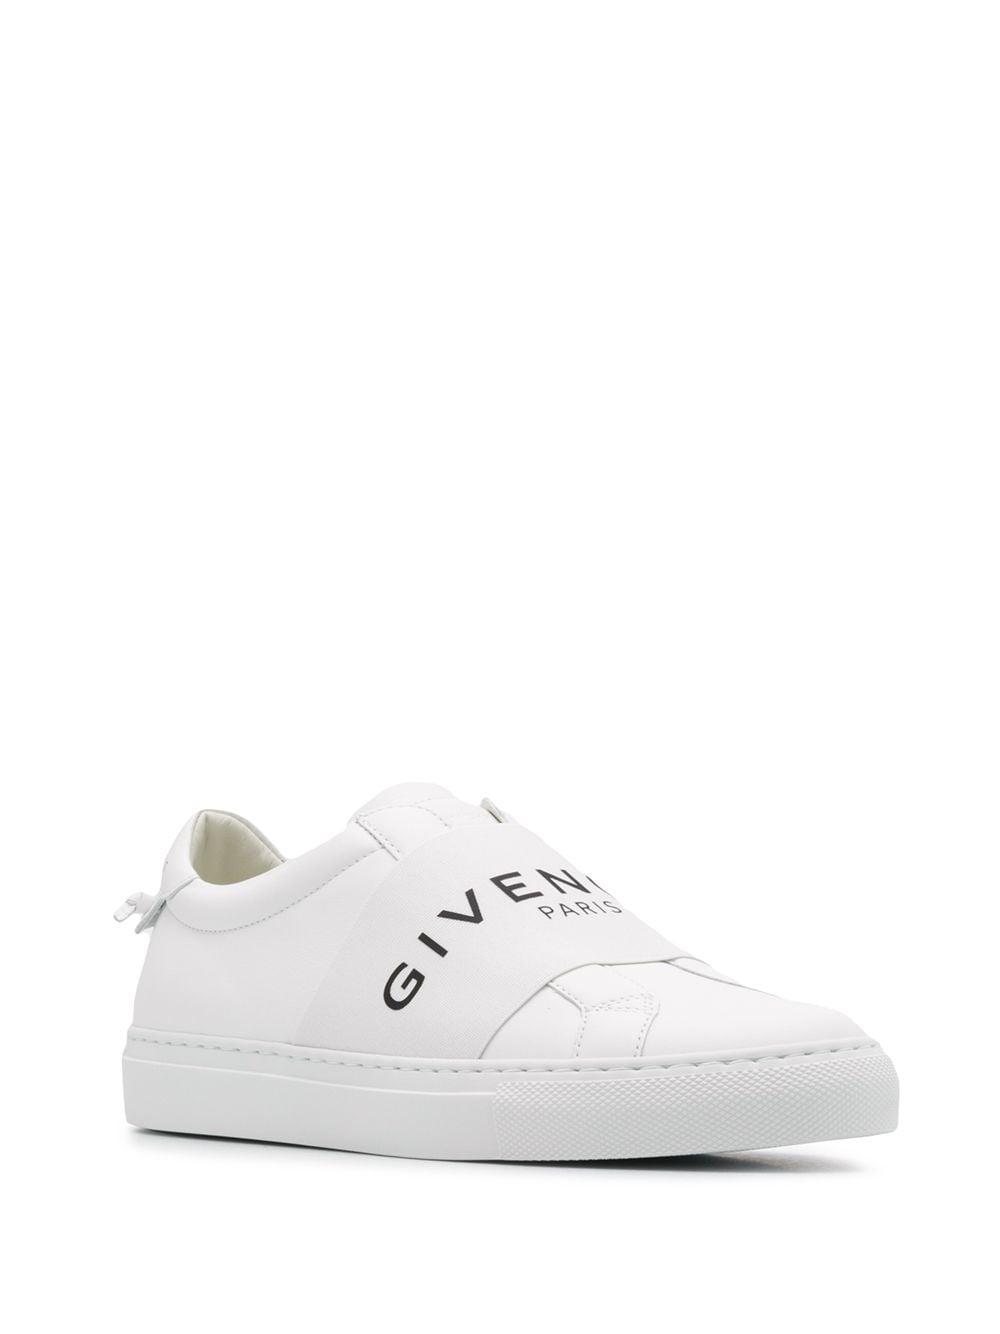 Givenchy Sneakers White | Lyst